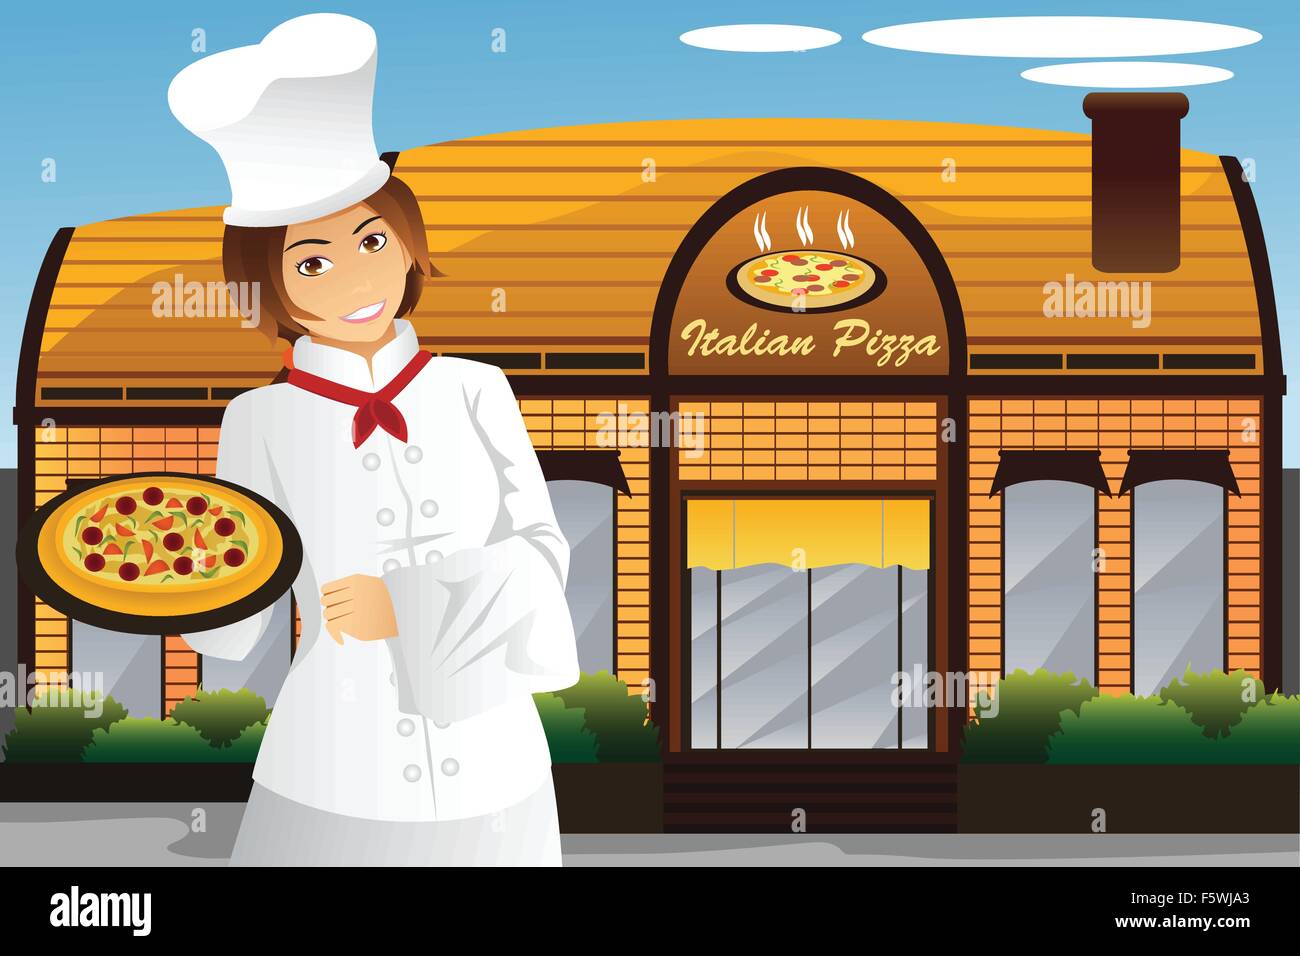 A vector illustration of waitress holding pizza standing in front of the restaurant Stock Vector